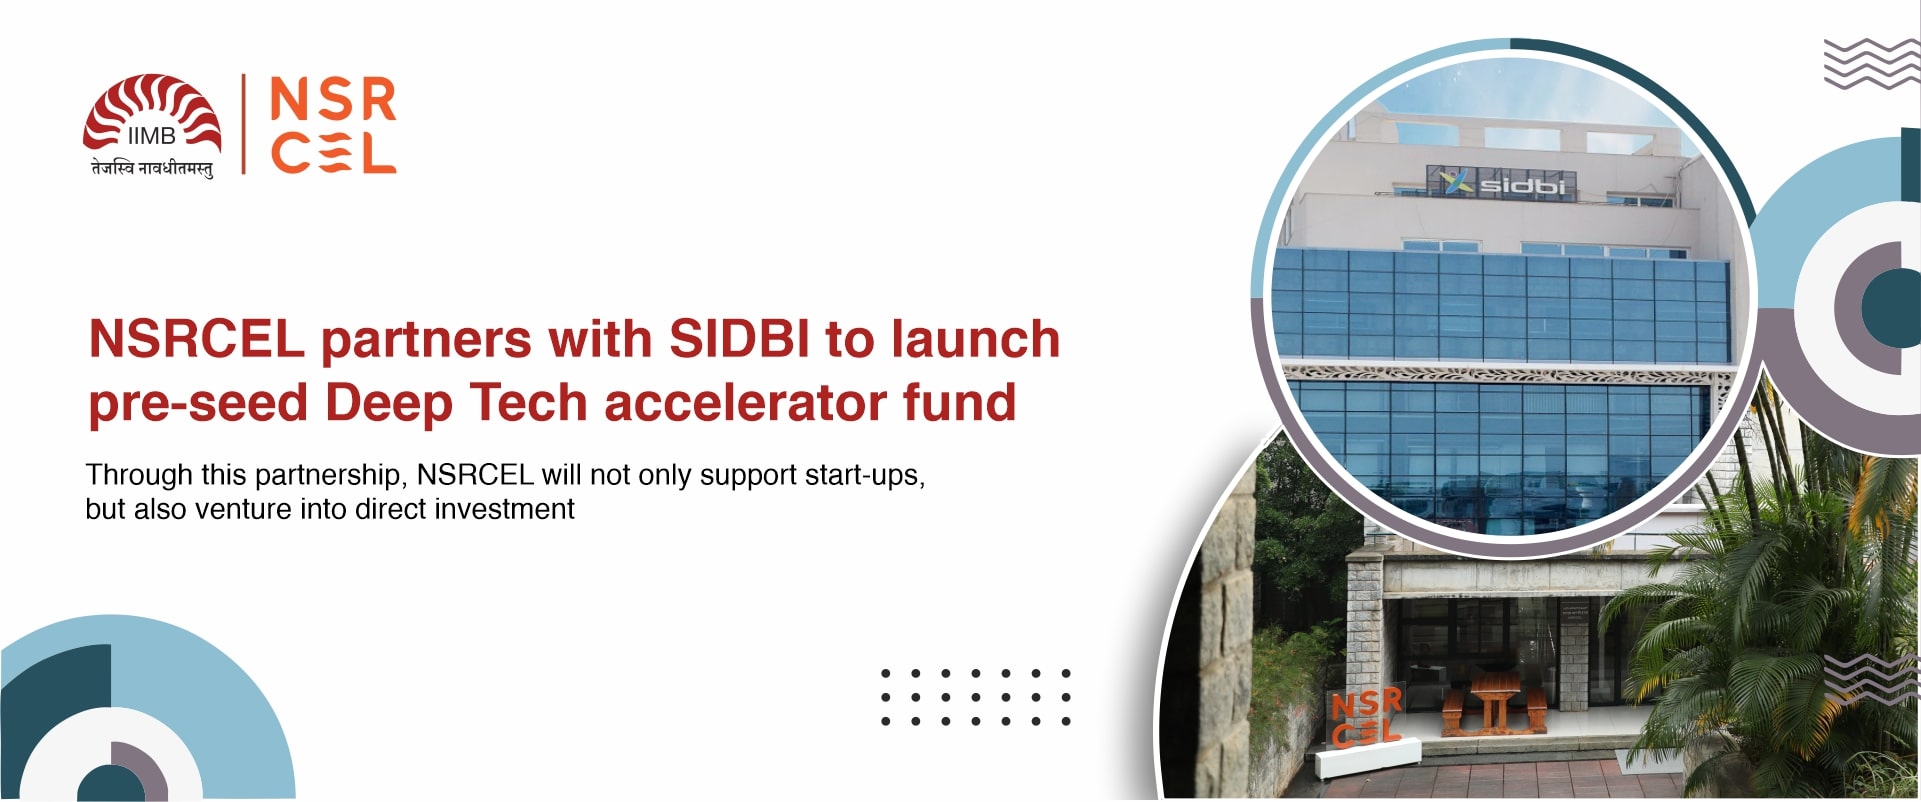 NSRCEL partners with SIDBI to launch pre-seed Deep Tech accelerator fund 